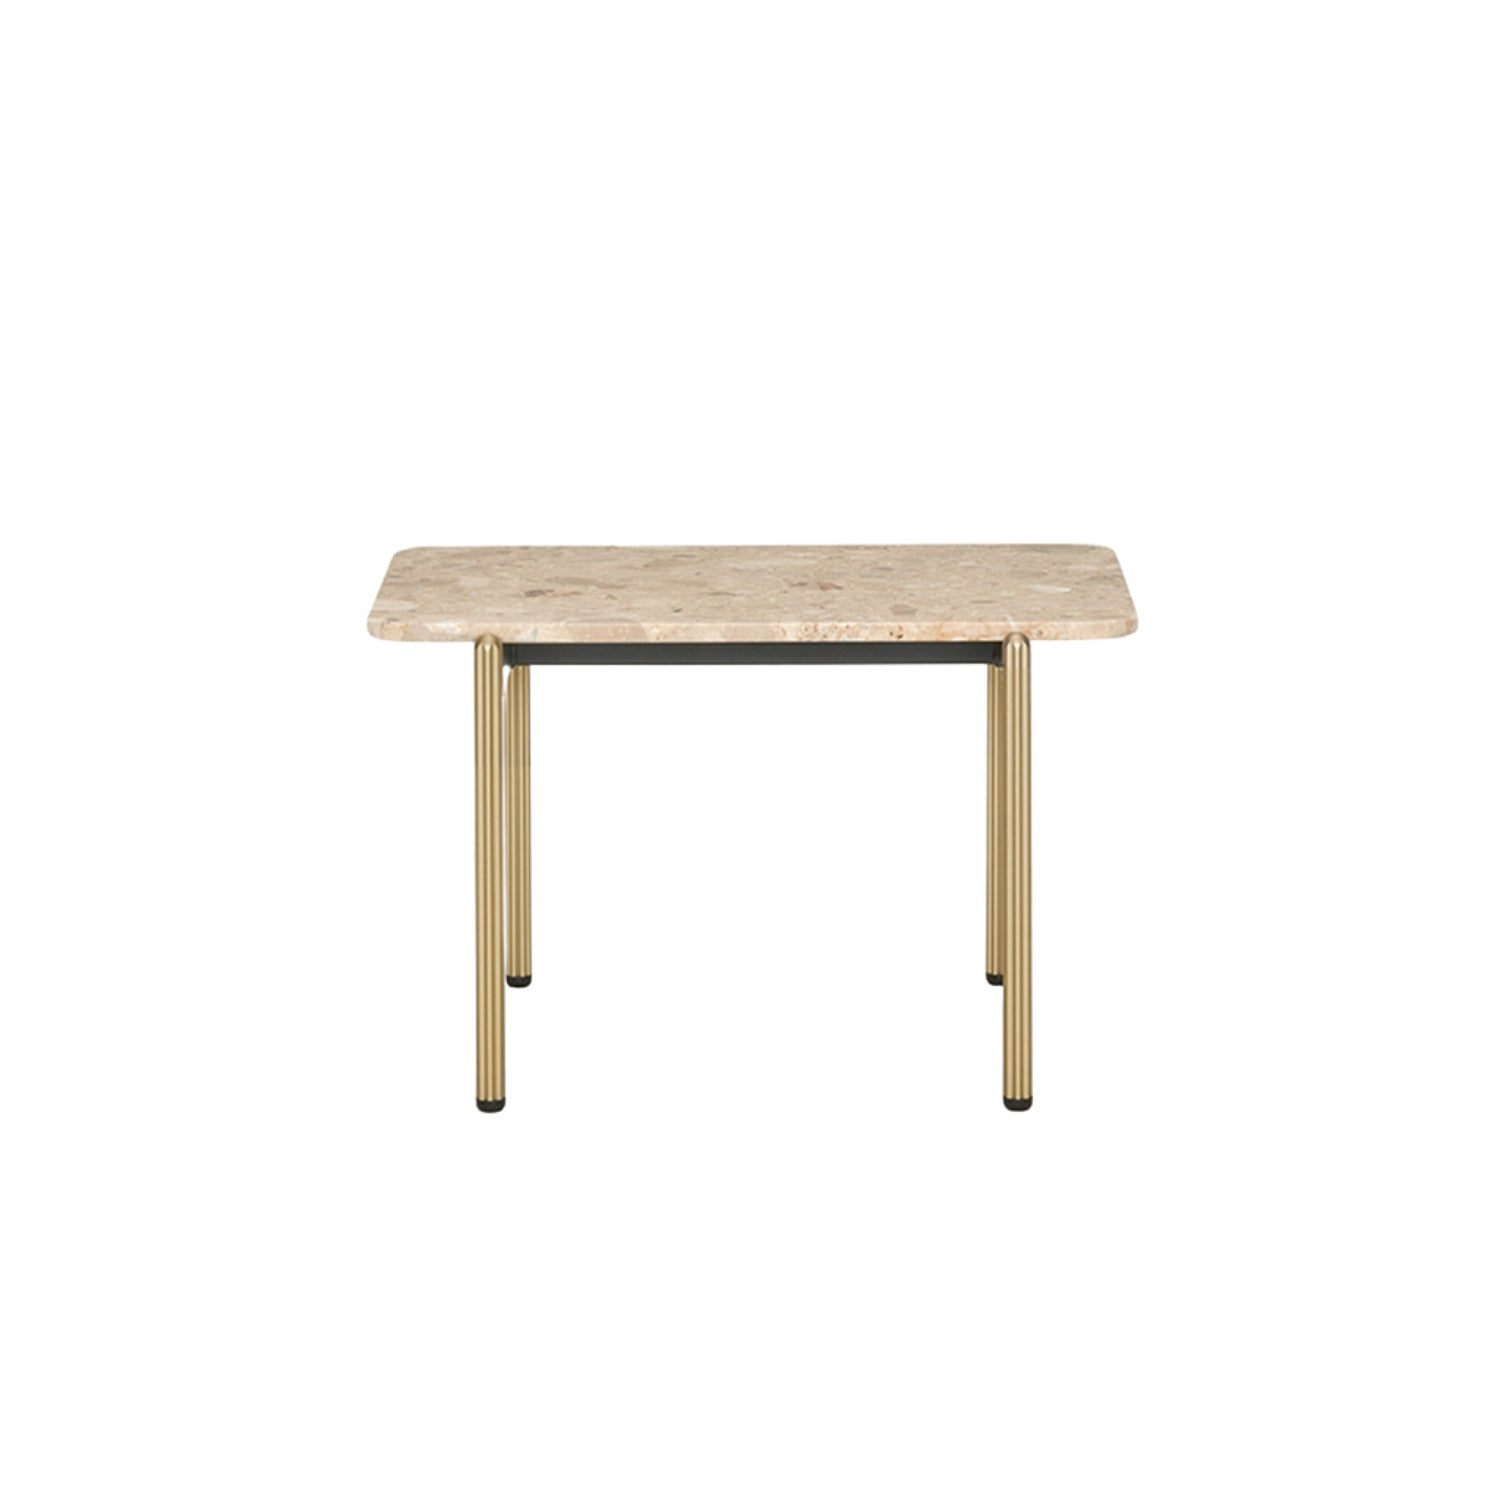 Pedrali Blume coffee side table in composite marble and brass legs